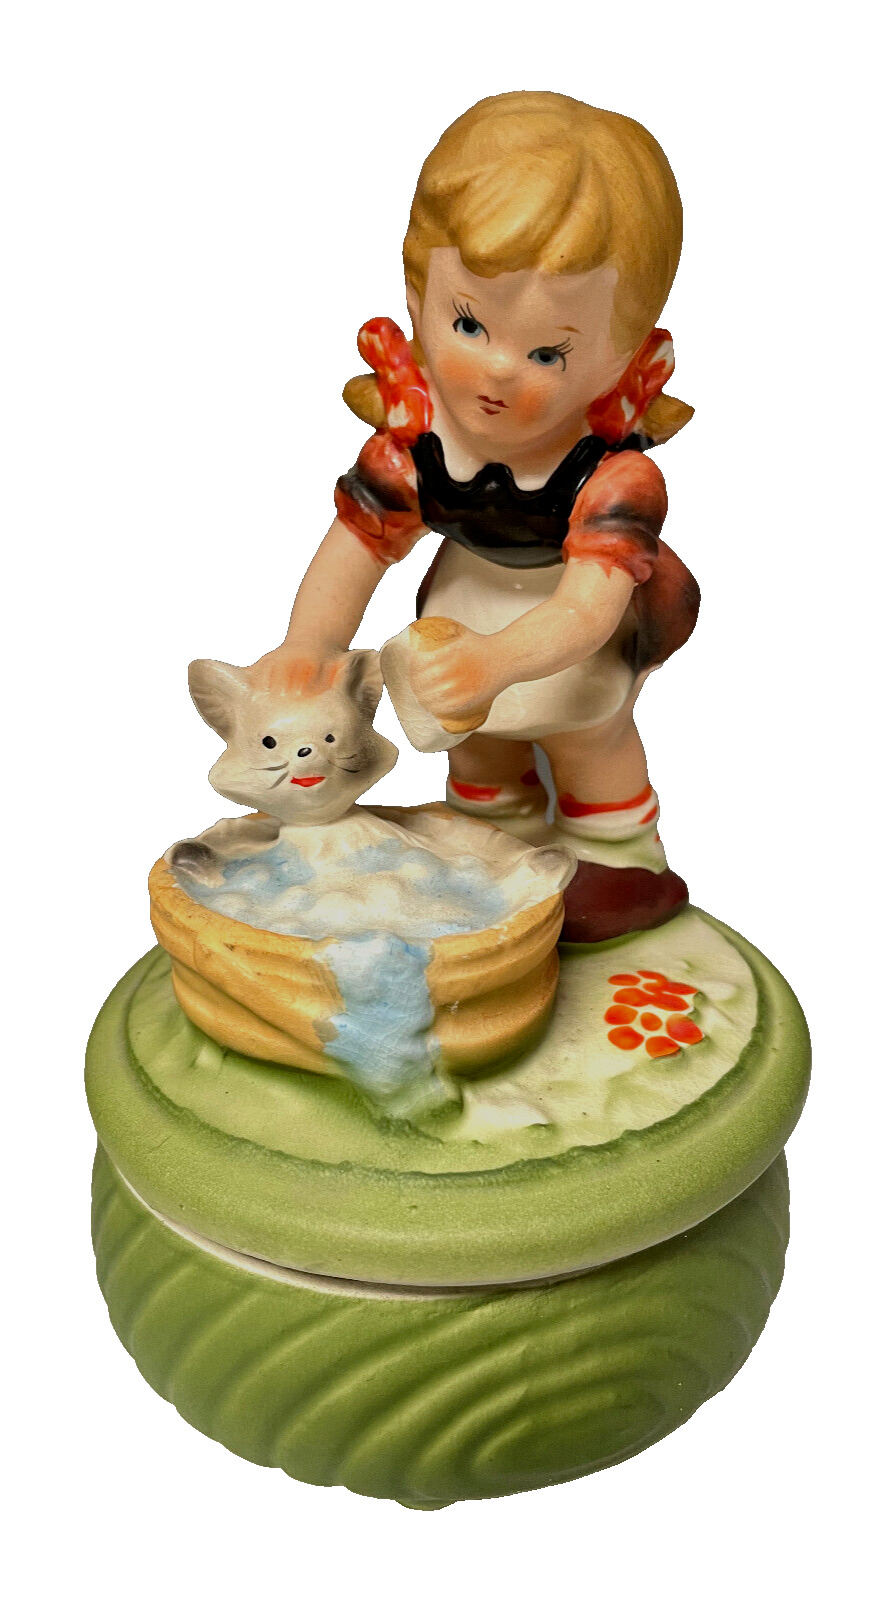 Vintage Music Box Girl Washing Kitty Cat in Tub Figurine PLAYS Tundra Imports